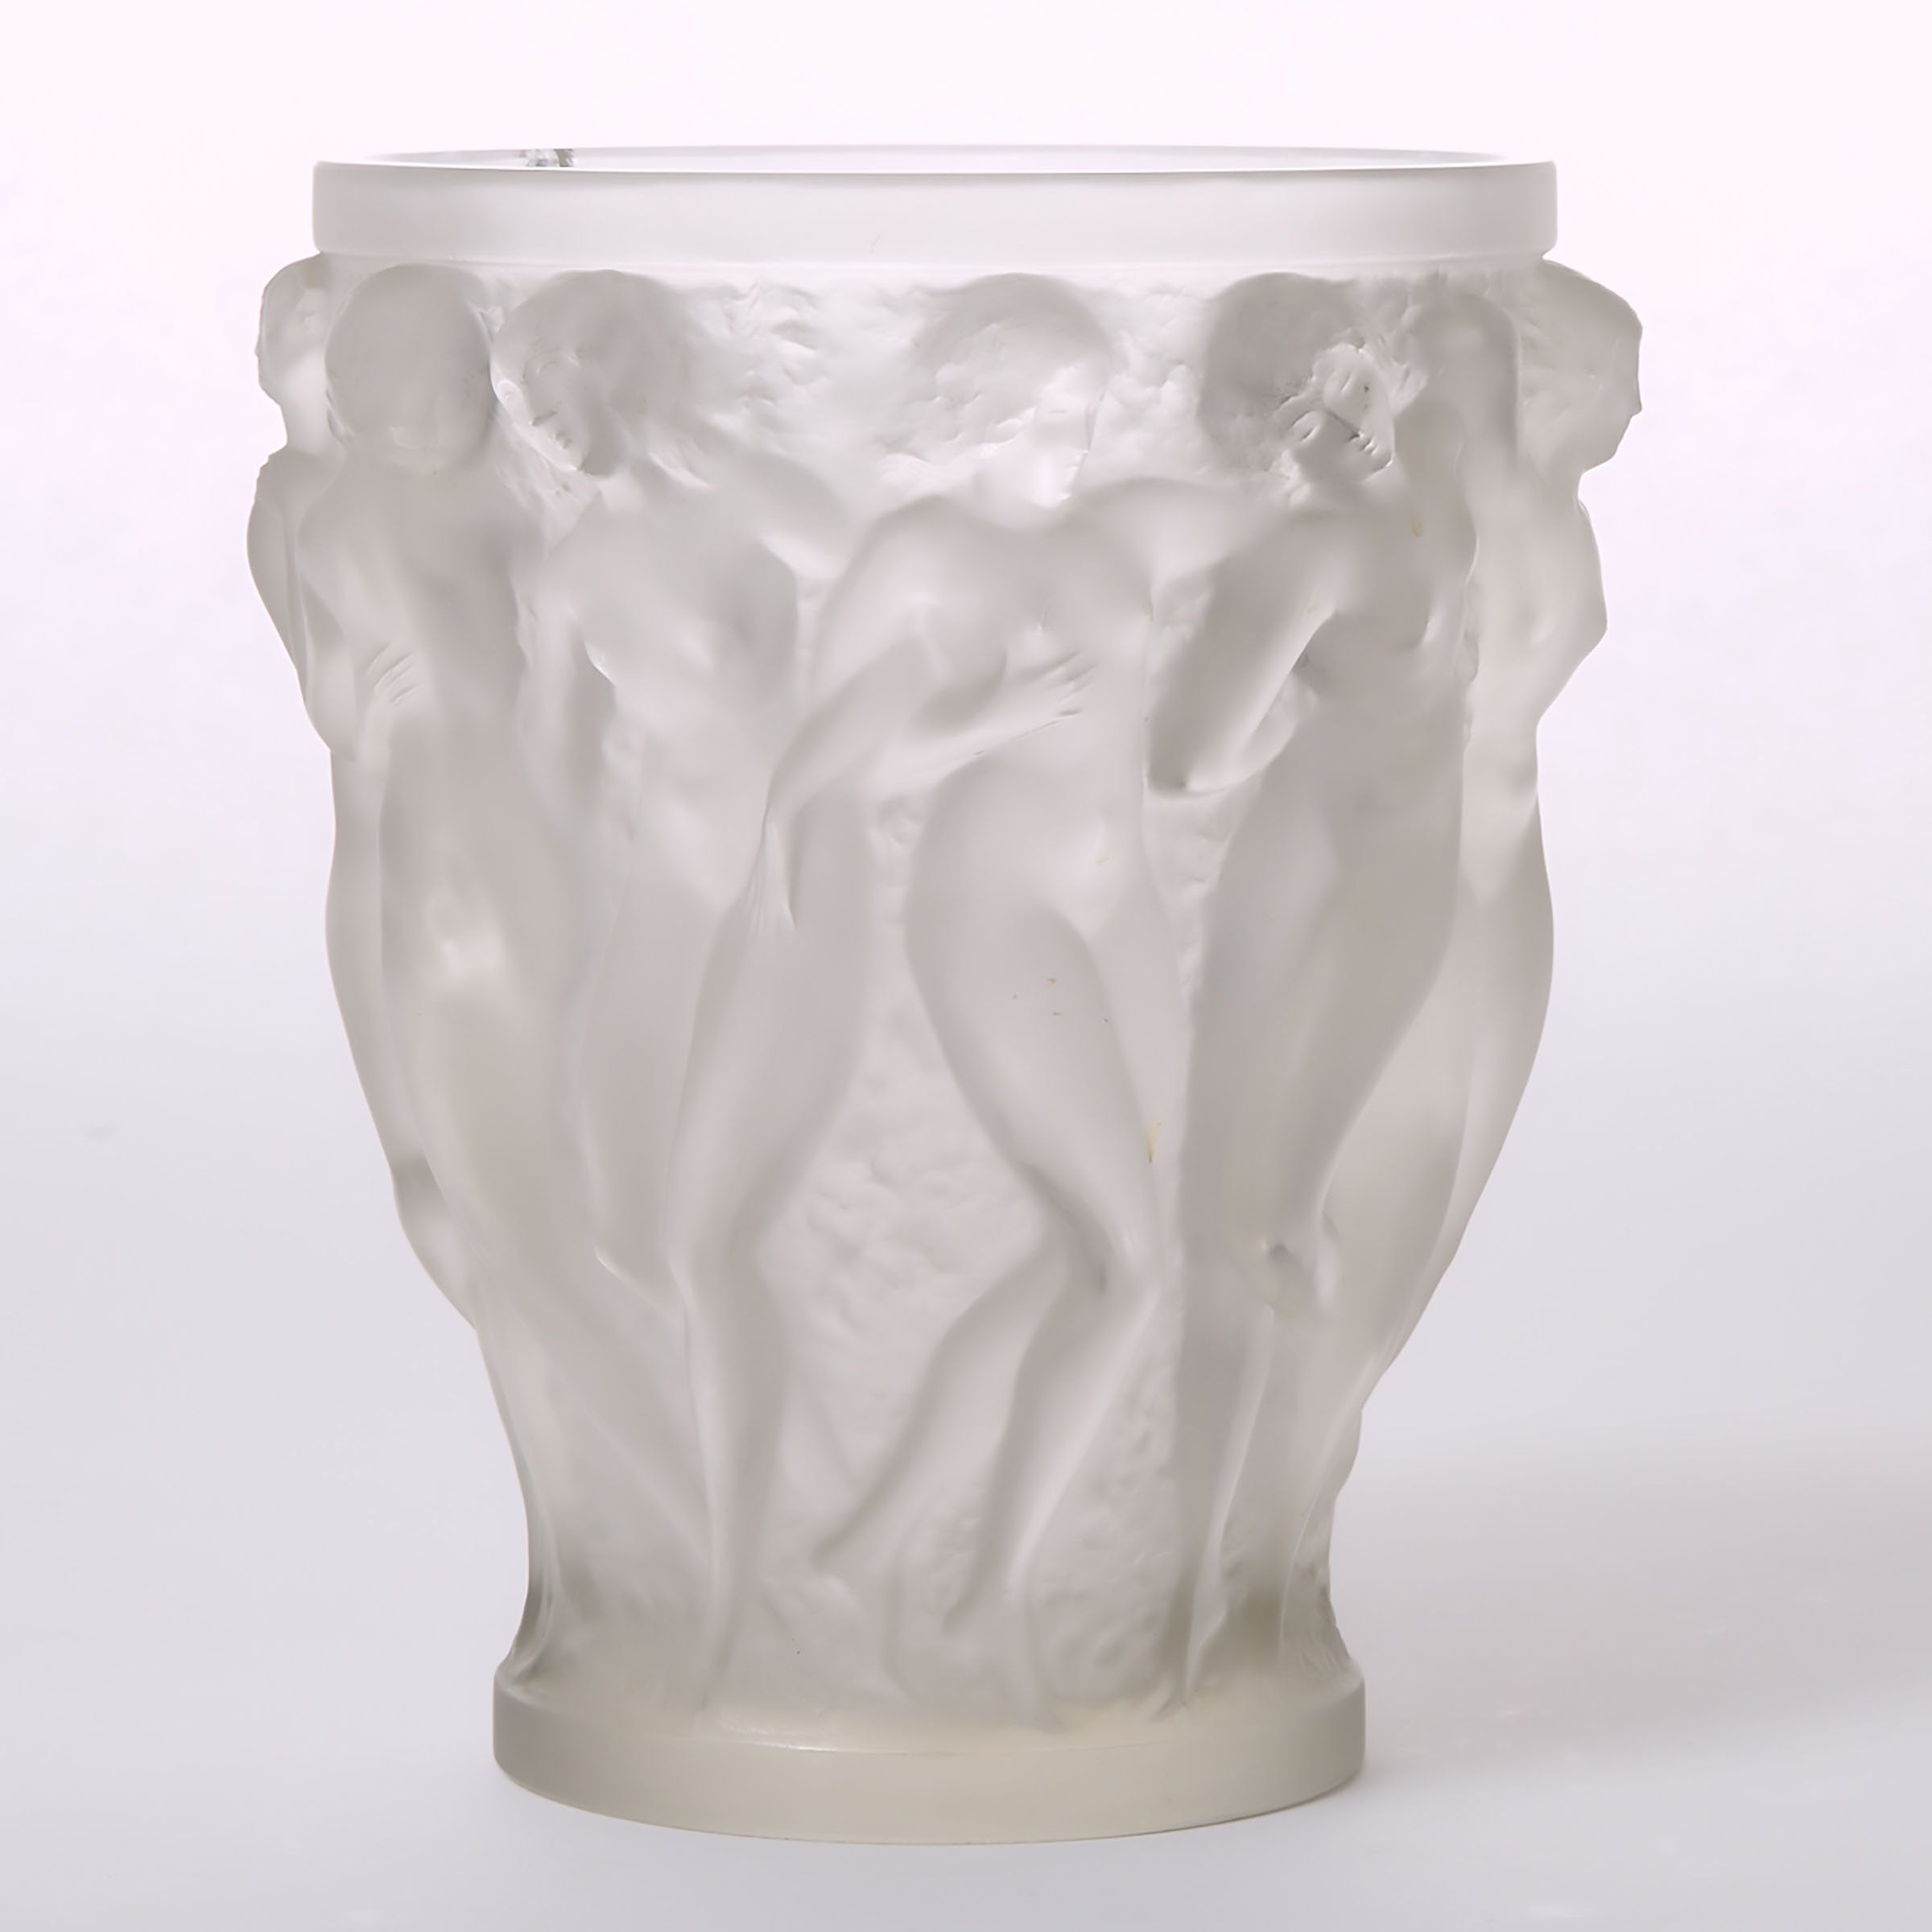 ‘Bacchantes’, Lalique Moulded and Frosted Glass Vase, post-1945